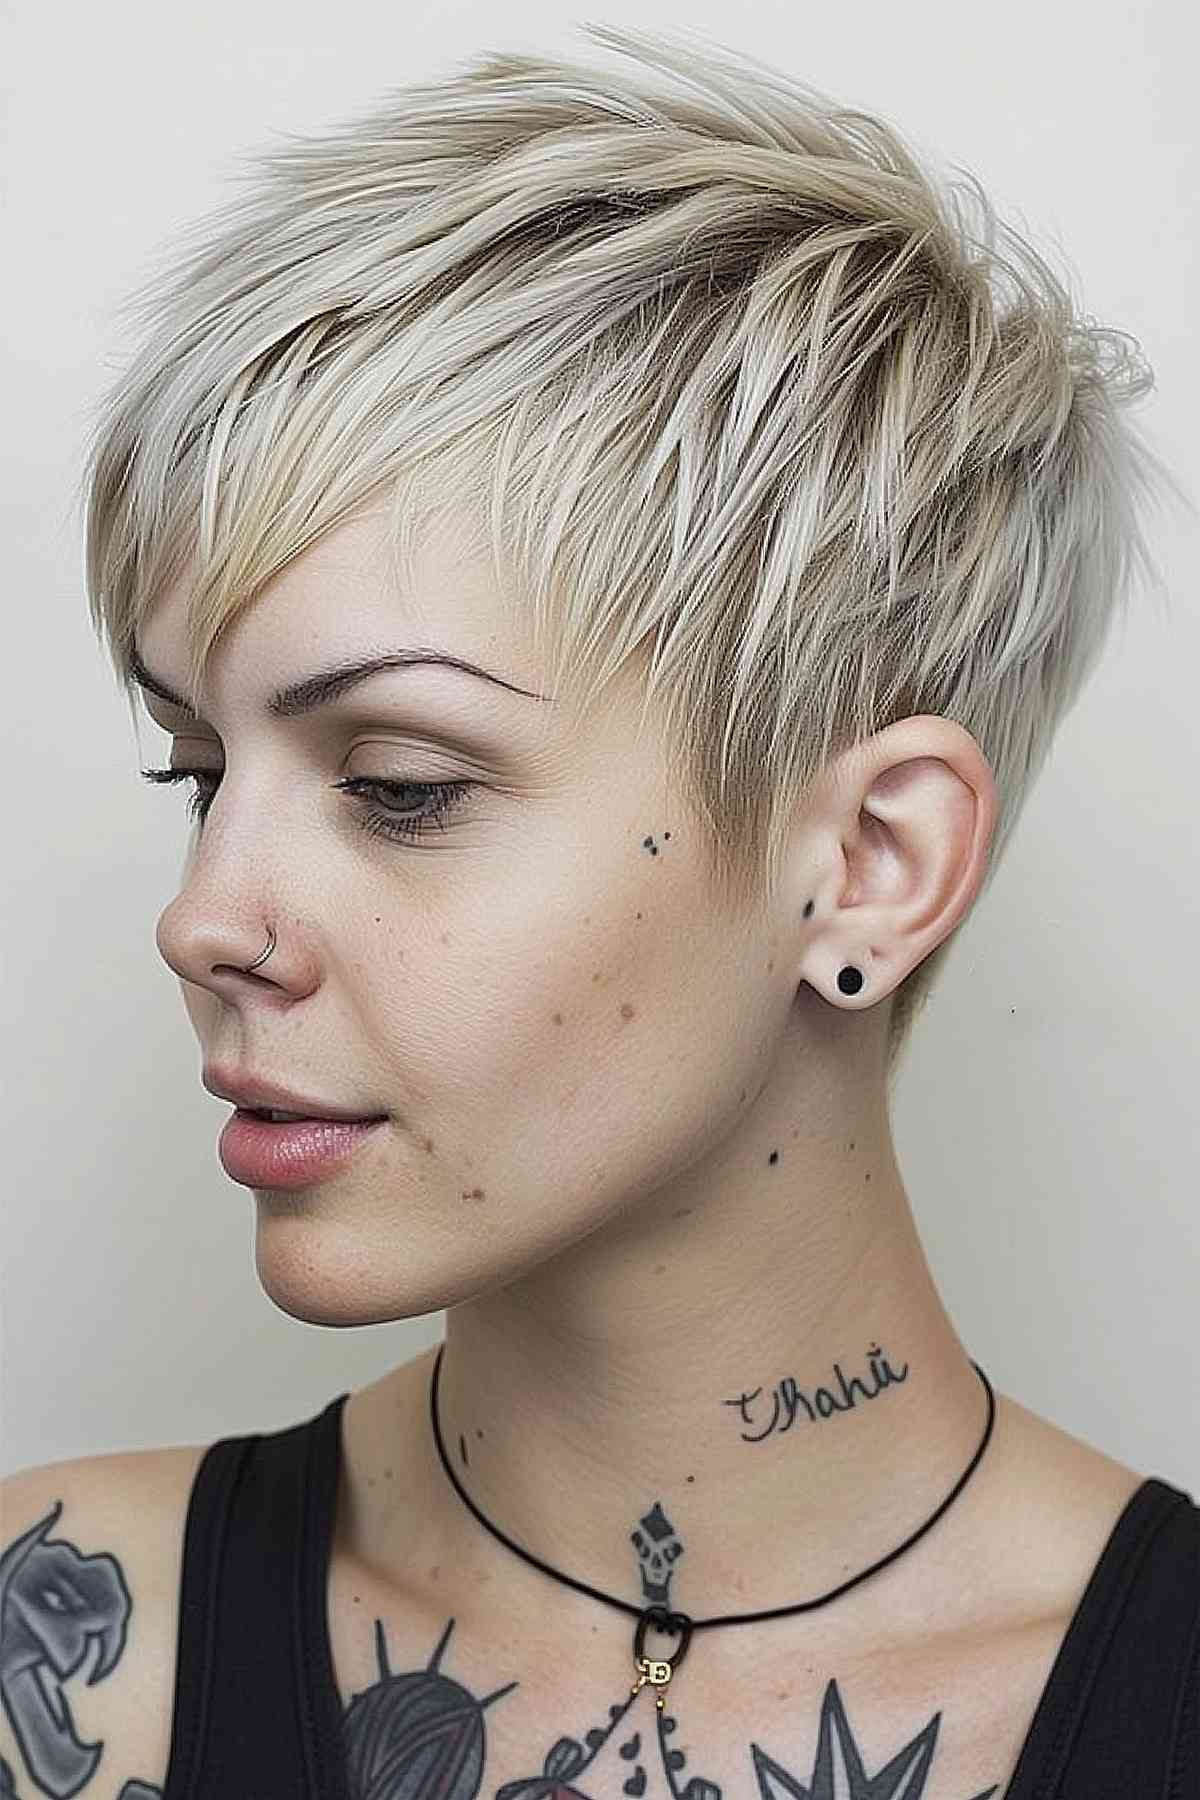 Chic punk pixie cut with blonde highlights and close-cut sides for a textured, low-maintenance style.